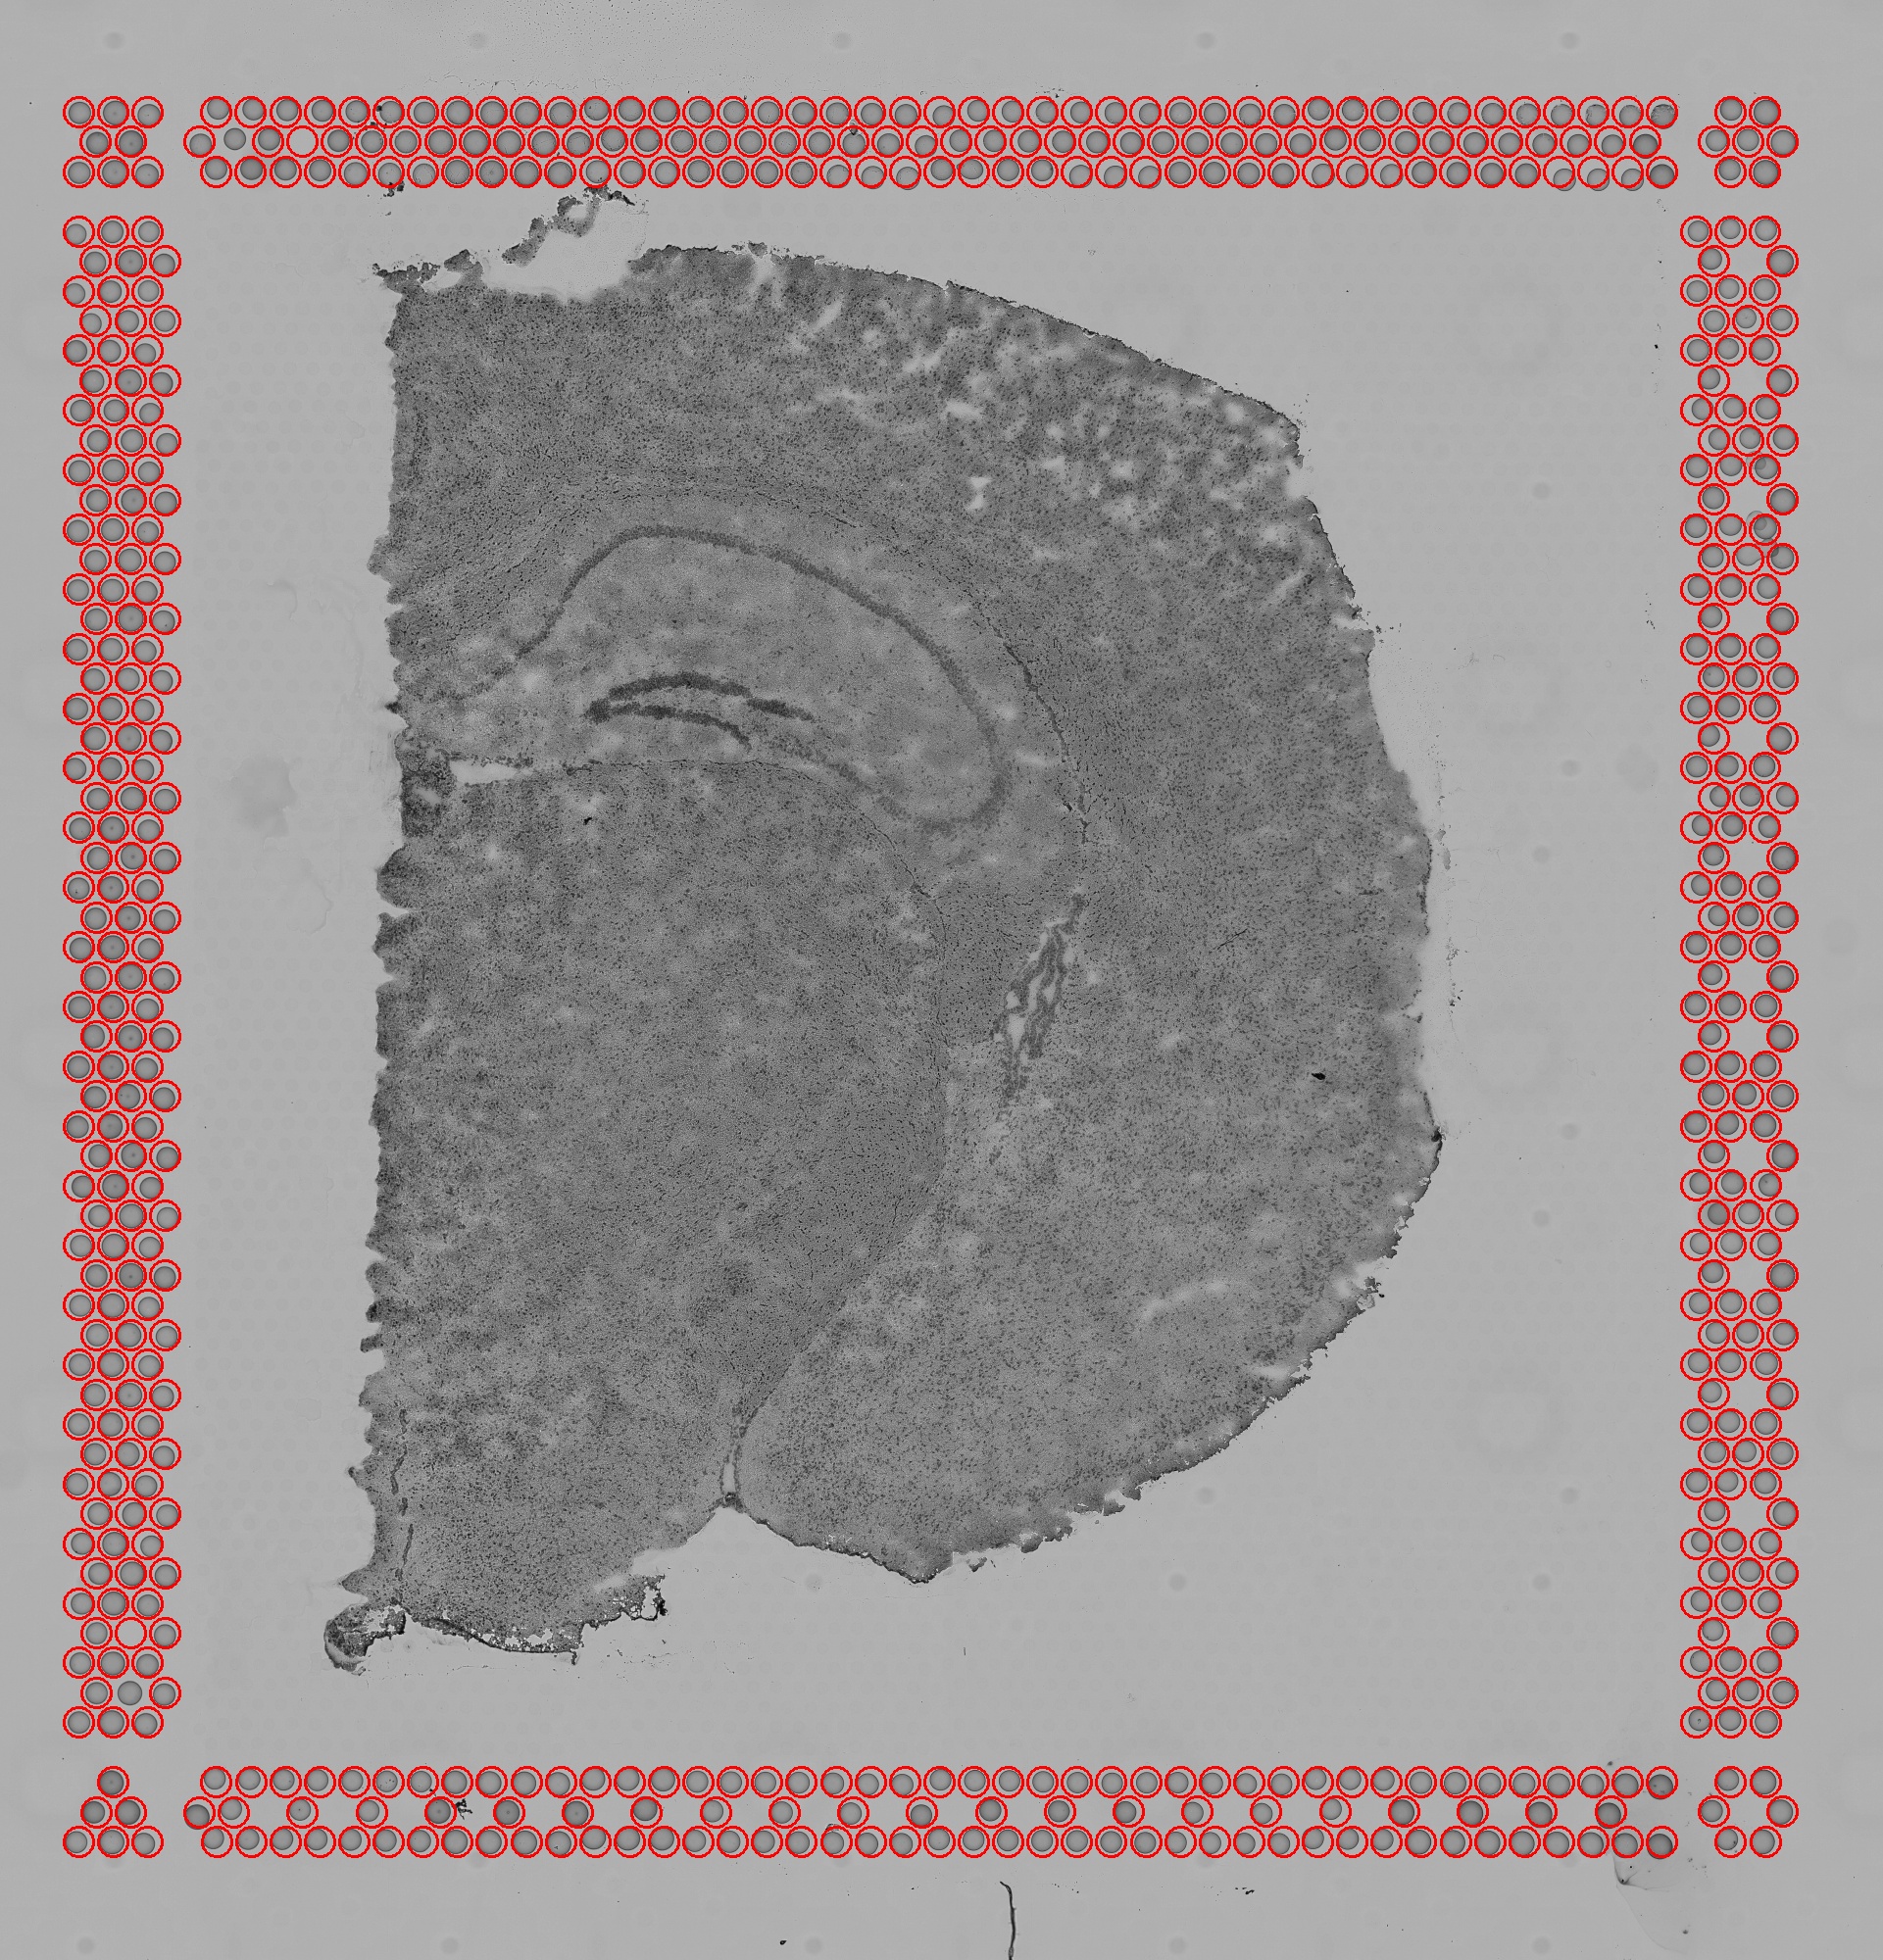 A single Visium tissue capture area with the fiducial frame aligned through the Loupe Browser such that the red circles overlap the fiducial frame as determined by visual inspection. Source: [10x Genomics](https://support.10xgenomics.com/spatial-gene-expression/software/pipelines/latest/output/images).